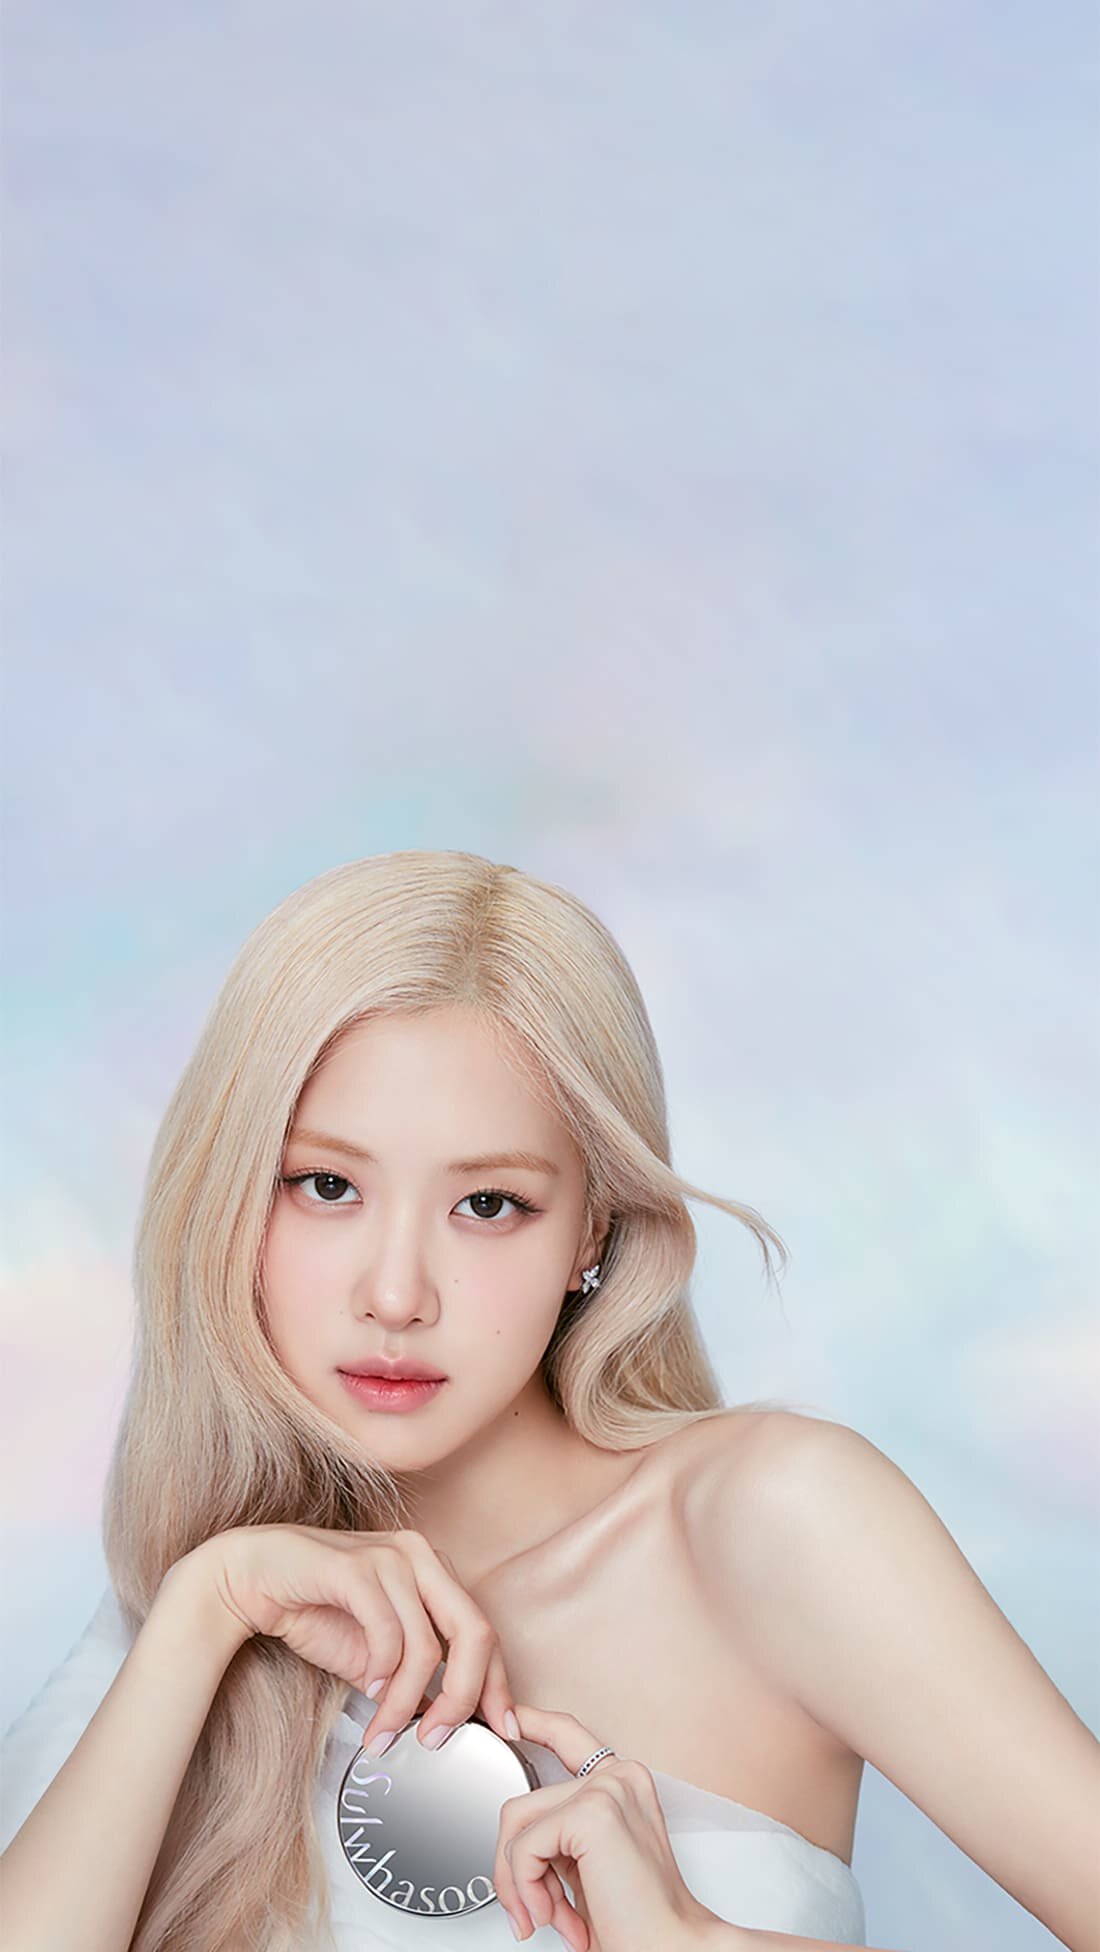 Rosé with Perfecting Cushion in her hand